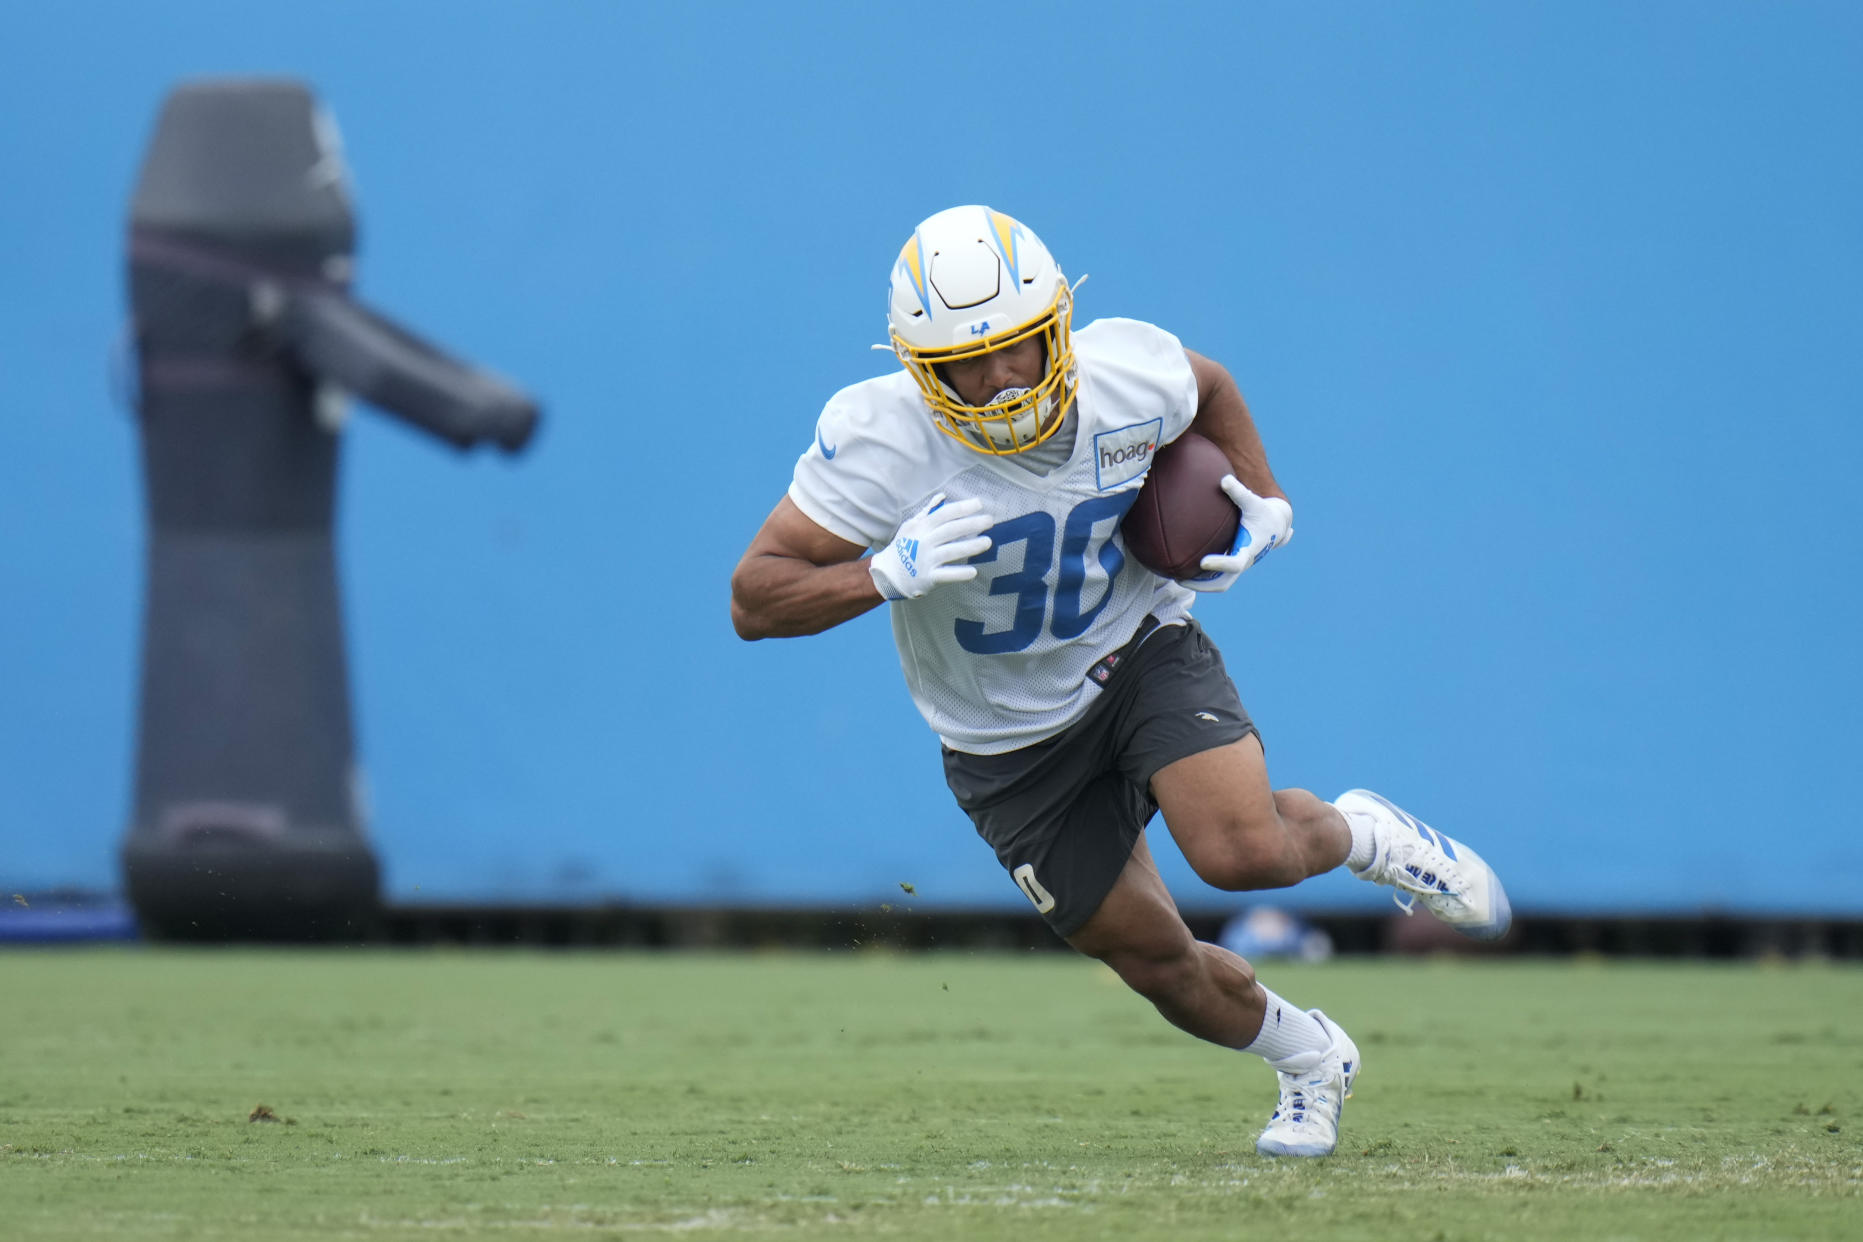 Now that Austin Ekeler's contract situation is resolved, we'll find out what new offensive coordinator Kellen Moore has in store for the Chargers' star running back. (AP Photo/Jae C. Hong)